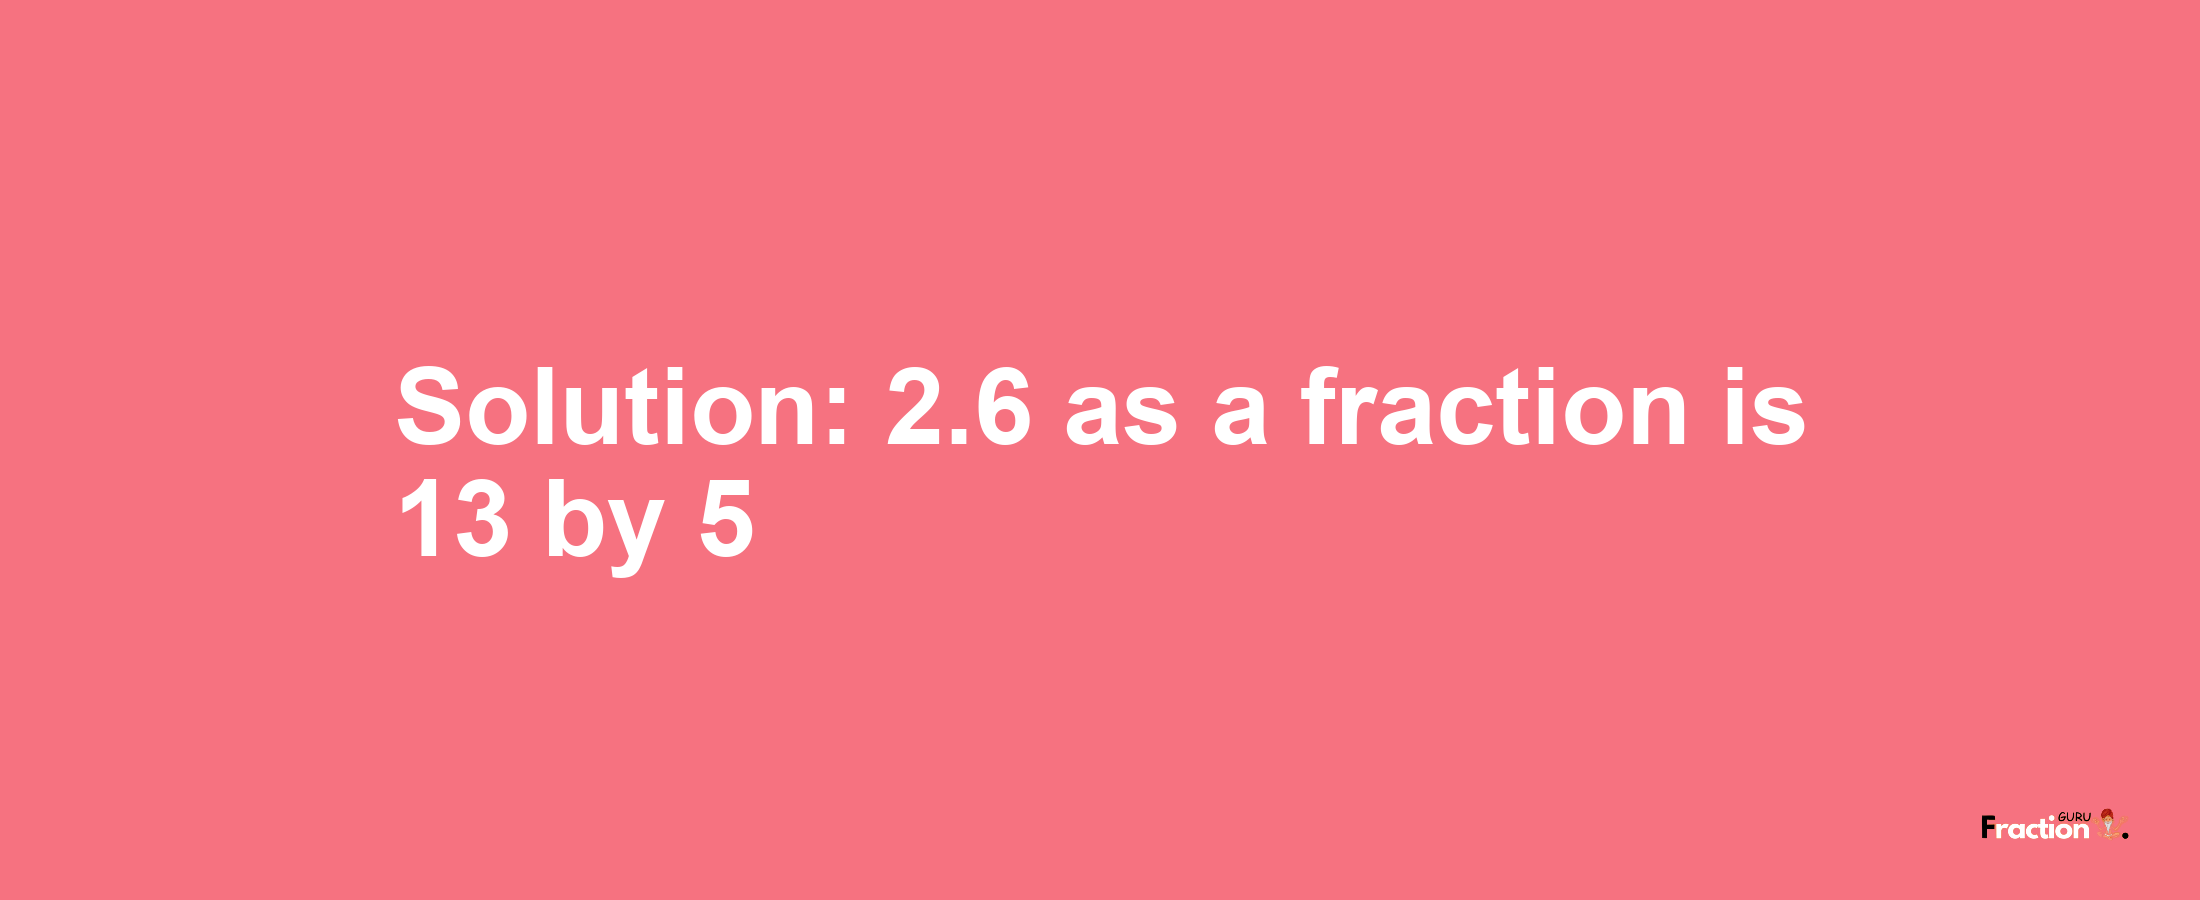 Solution:2.6 as a fraction is 13/5